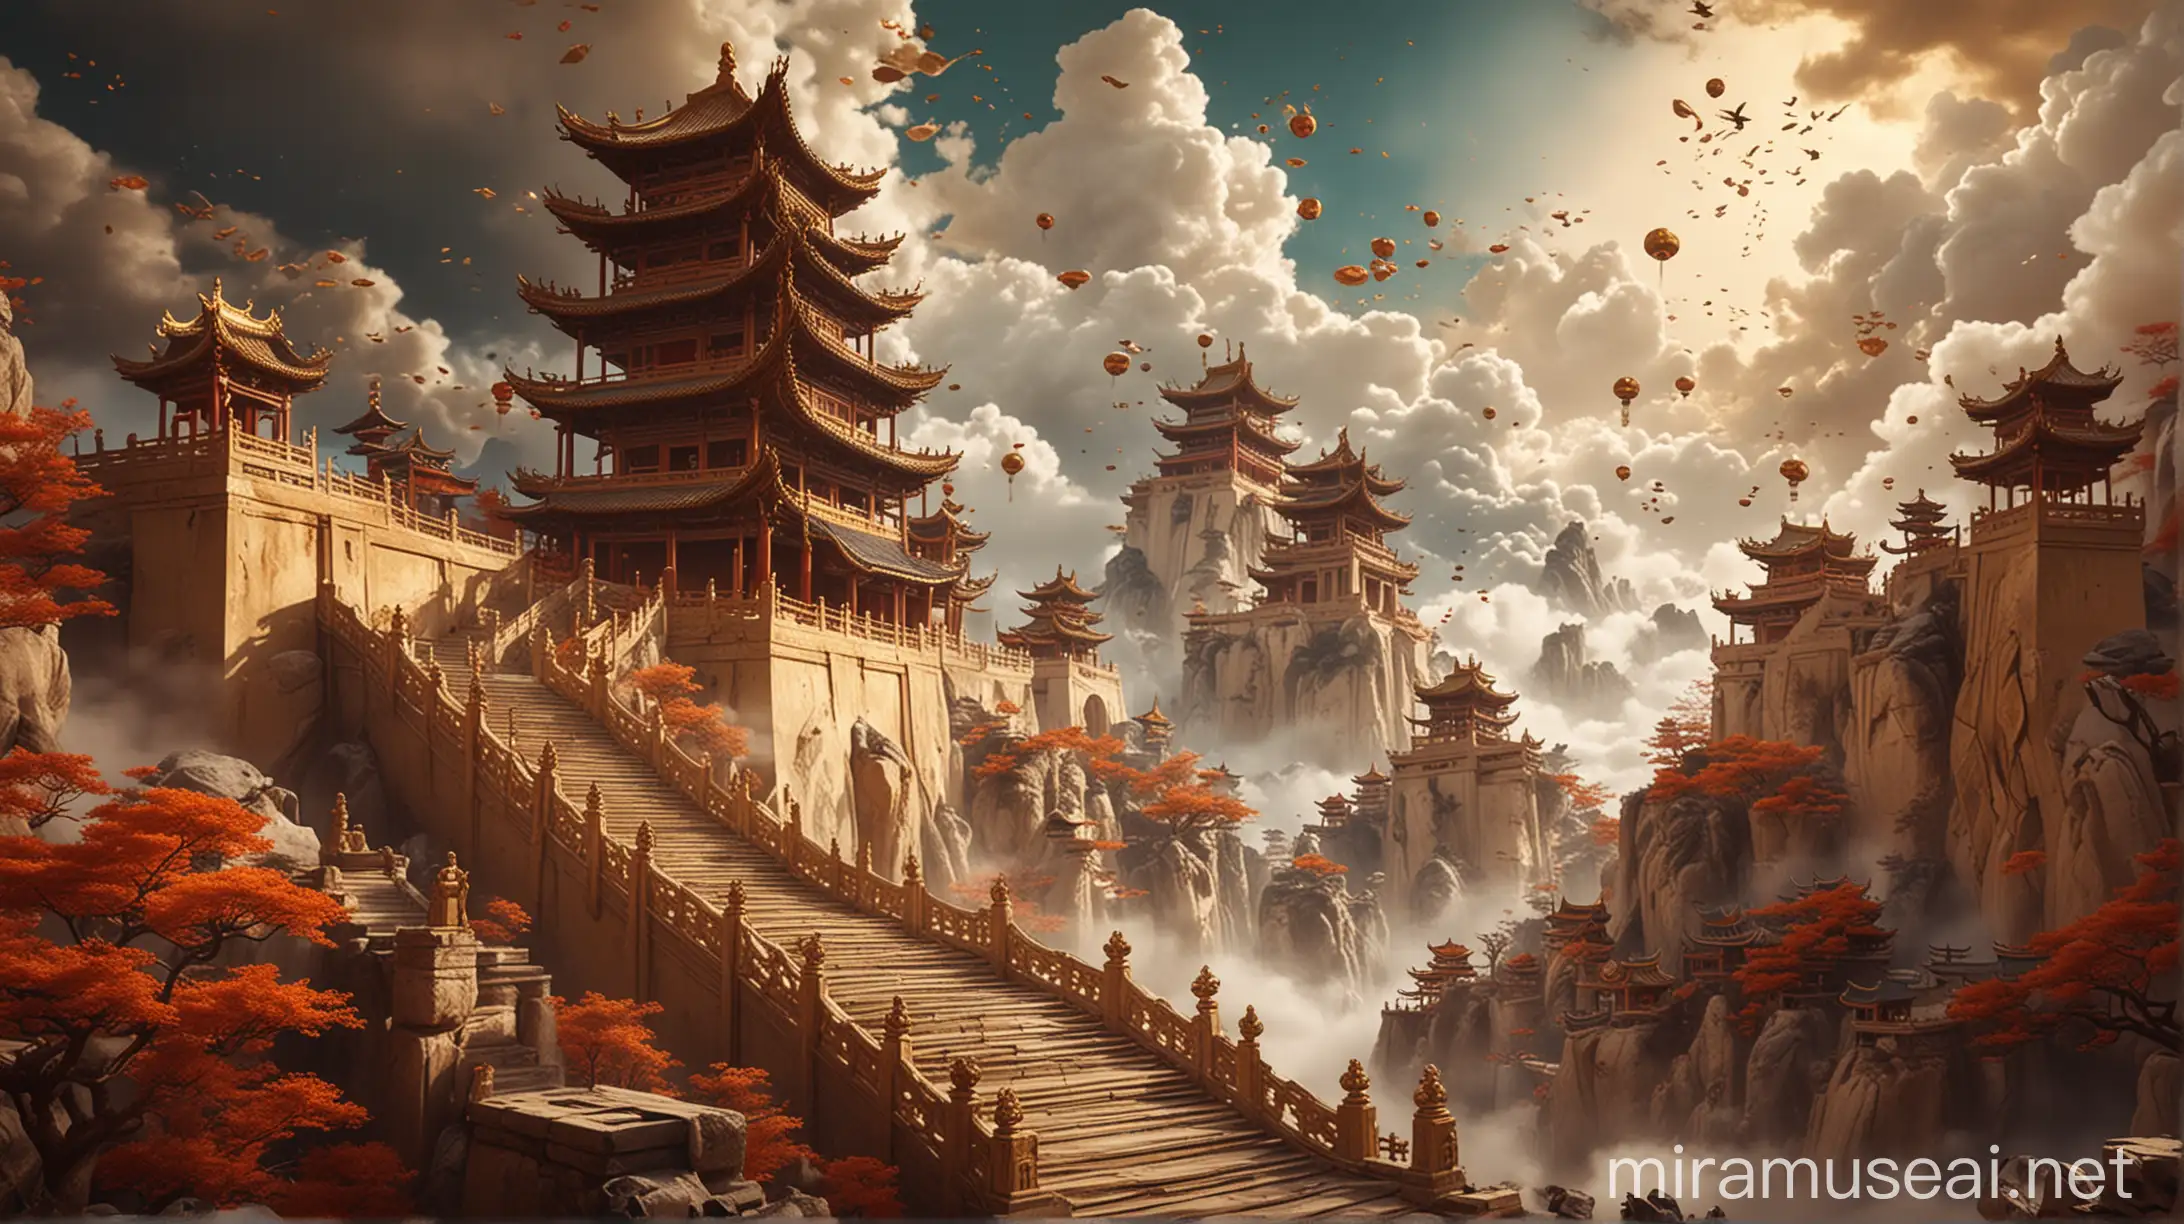 Golden Chinese Landscape Painting with Floating Scrolls and Auspicious Clouds